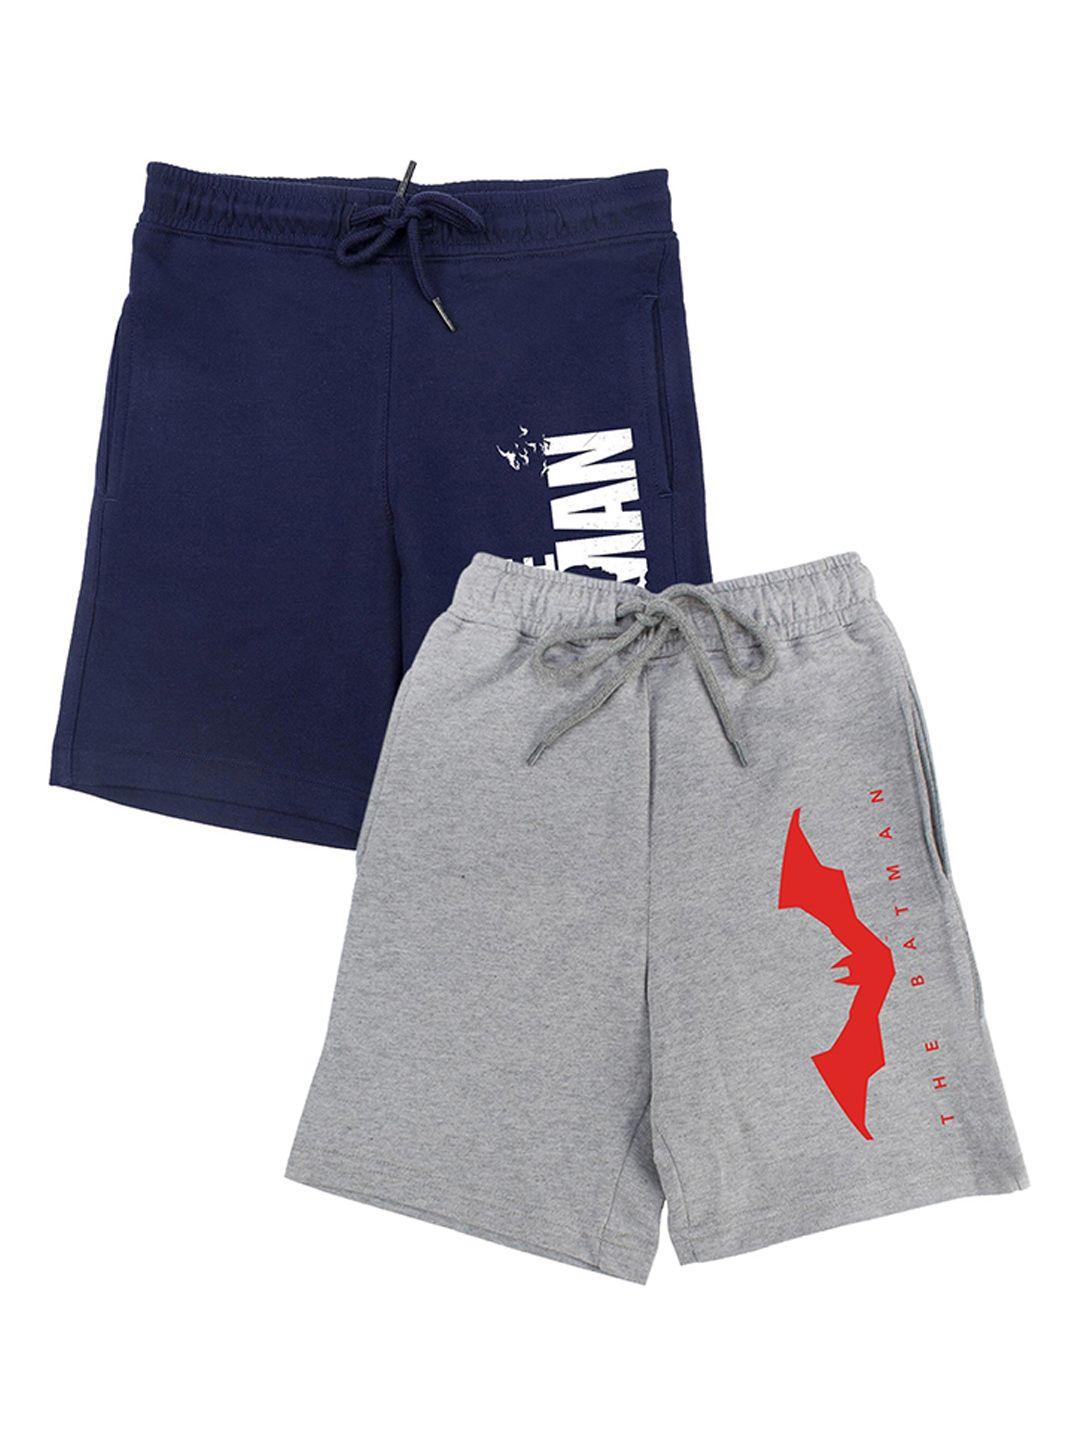 dc by wear your mind boys pack of 2 batman shorts